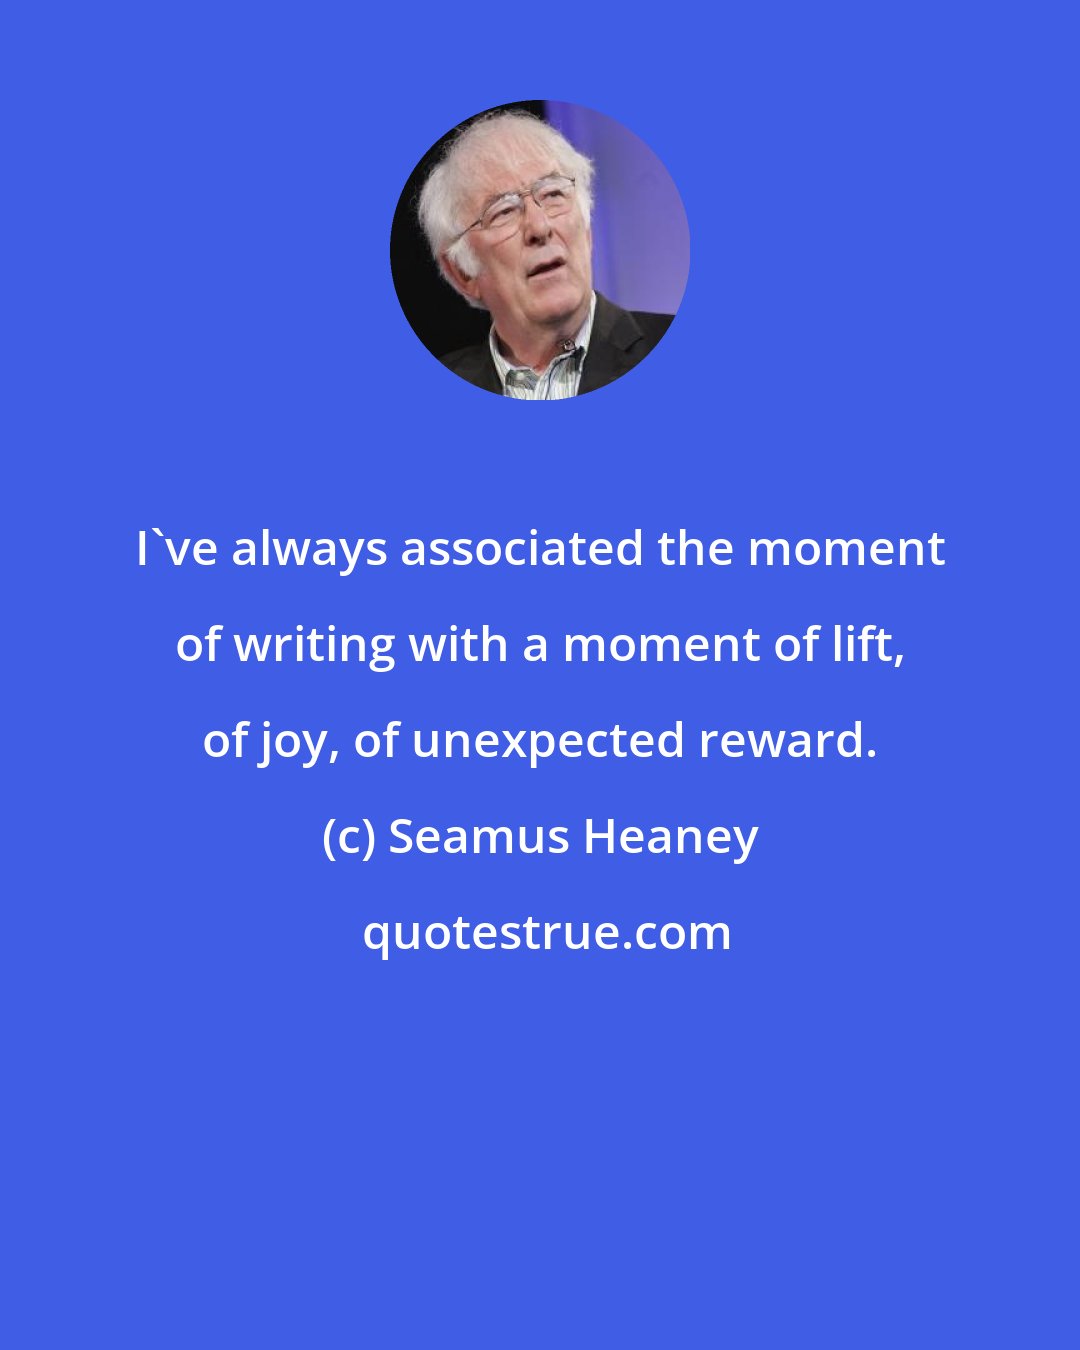 Seamus Heaney: I've always associated the moment of writing with a moment of lift, of joy, of unexpected reward.